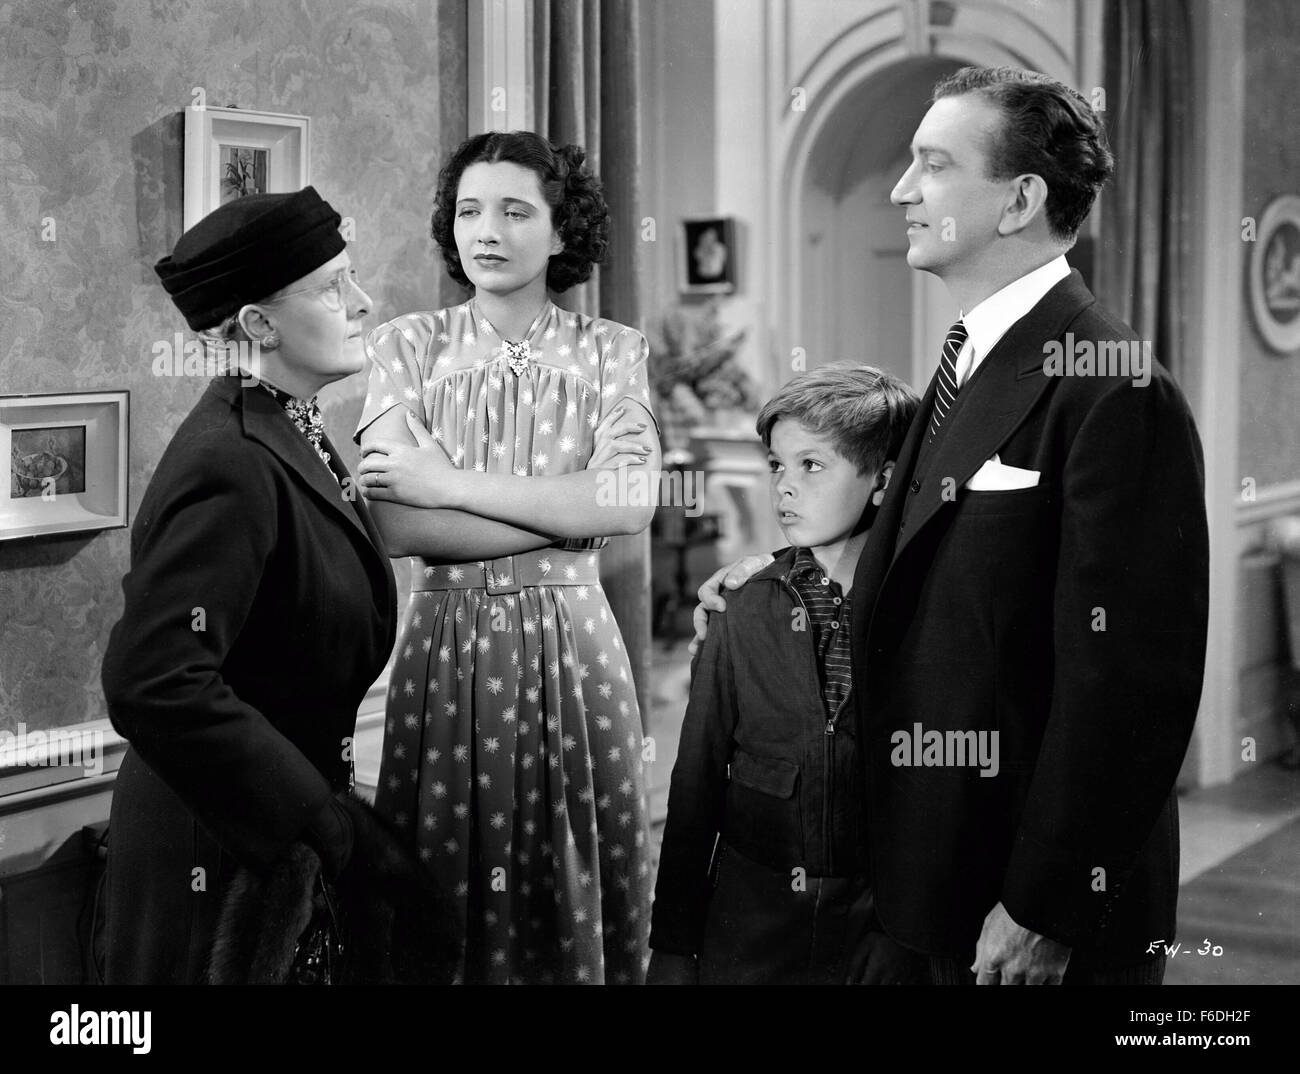 RELEASE DATE: July 9, 1938. MOVIE TITLE: My Bill. STUDIO: Warner Bros. Pictures. PLOT: Francis is the mother of four kids, three of whom are ungrateful to their widowed mom and move in with their wealthy aunt. Only Moore remains faithful to his mother. He befriends a wealthy neighbor, and when she passes away, they discover she has left her entire fortune to Moore. PICTURED: ELIZABETH RISDON as Aunt Caroline Colbrook, KAY FRANCIS as Mary Colbrook, DICKIE MOORE as Bill Colbrook and JOHN LITEL as John C. Rudlin. Stock Photo